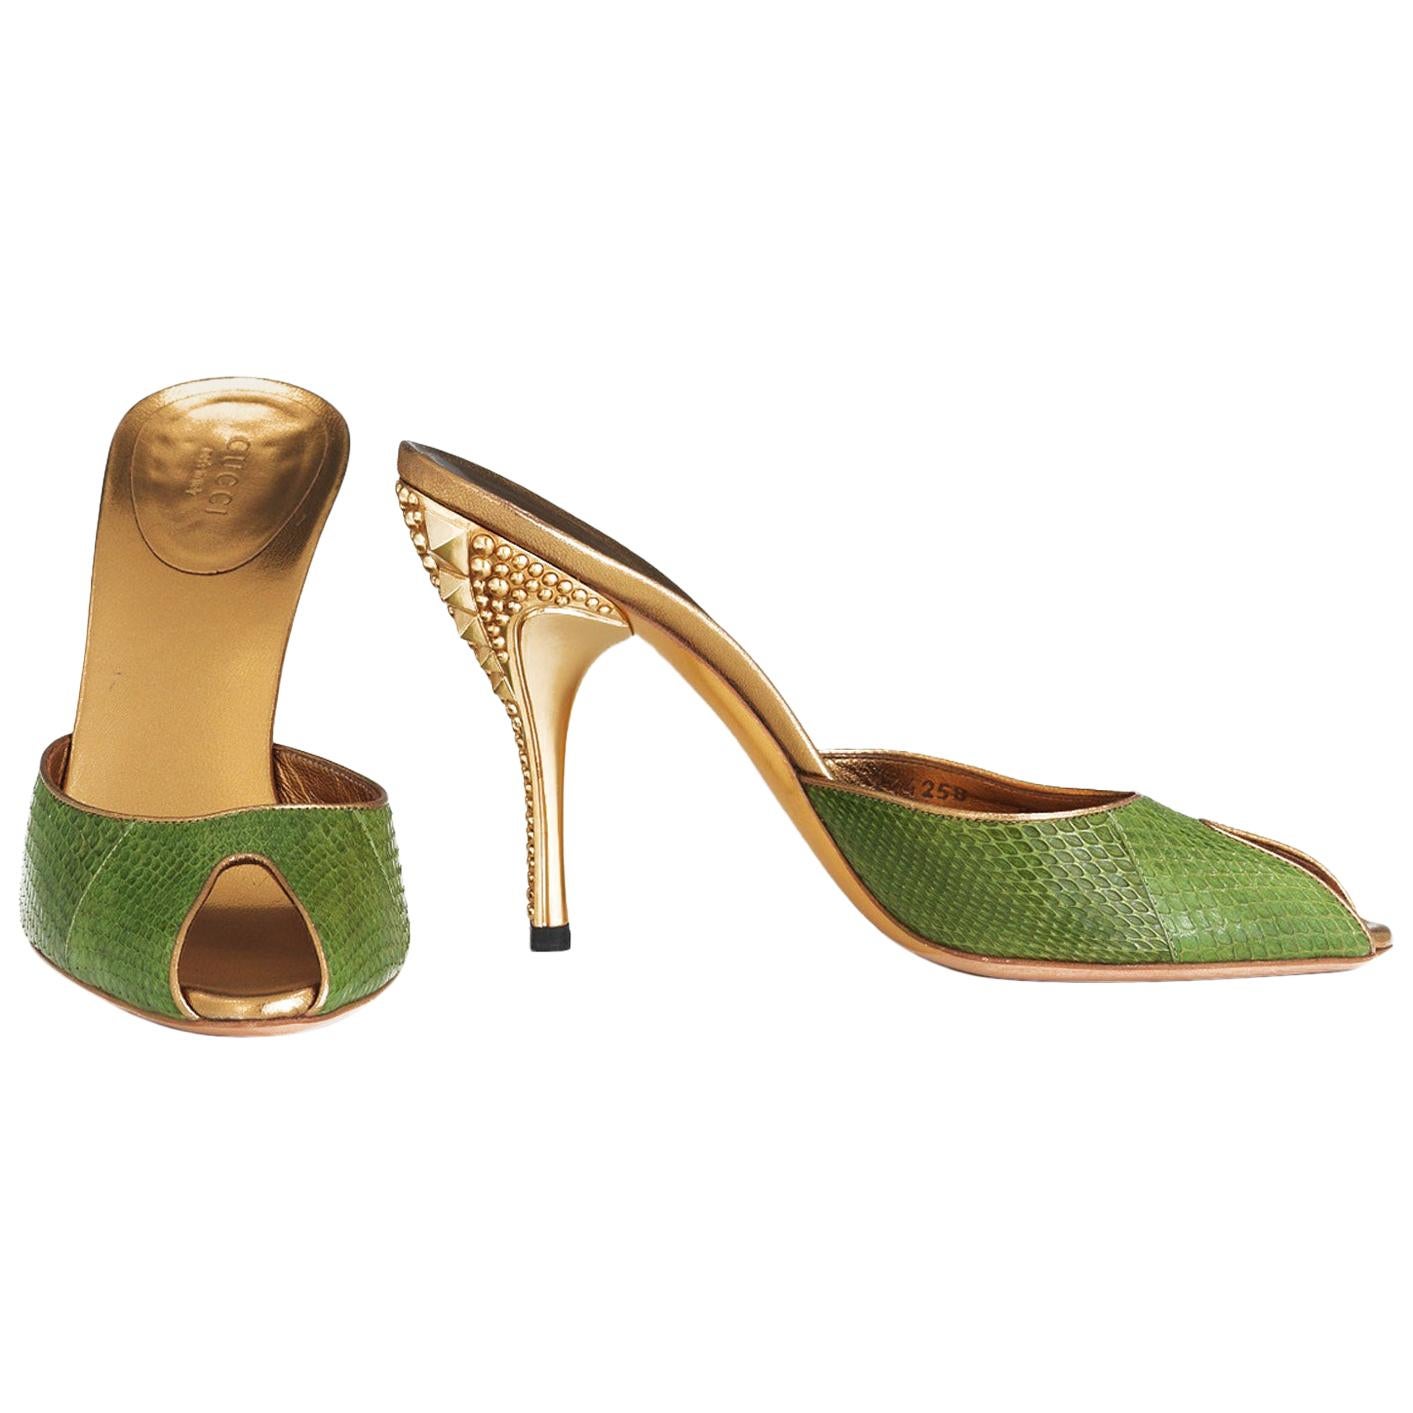 New Tom Ford for Gucci Studded Green Gold Runway Heels Shoes Mules 37 B  US 7 B